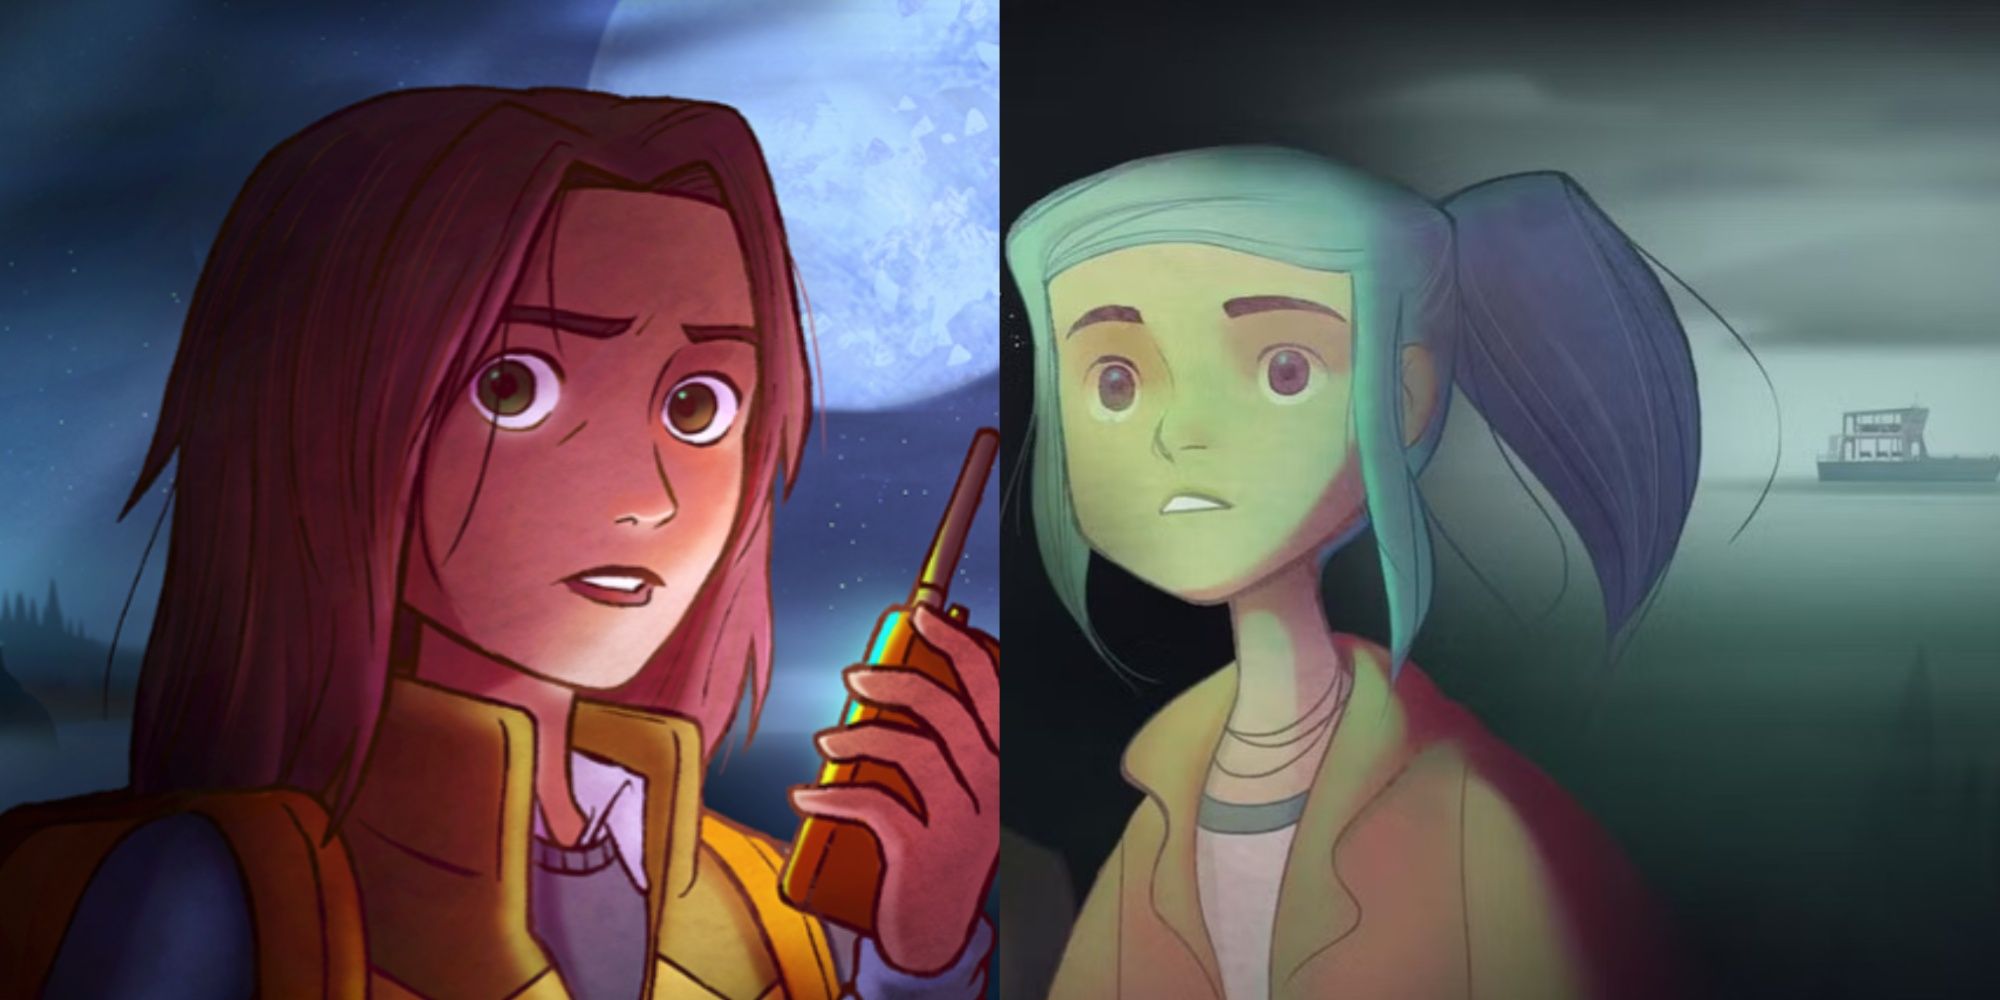 Split-image of Riley from Oxenfree 2 talking into a walkie-talkie and a close-up of Alex from the original Oxenfree, the boat visible in the background.